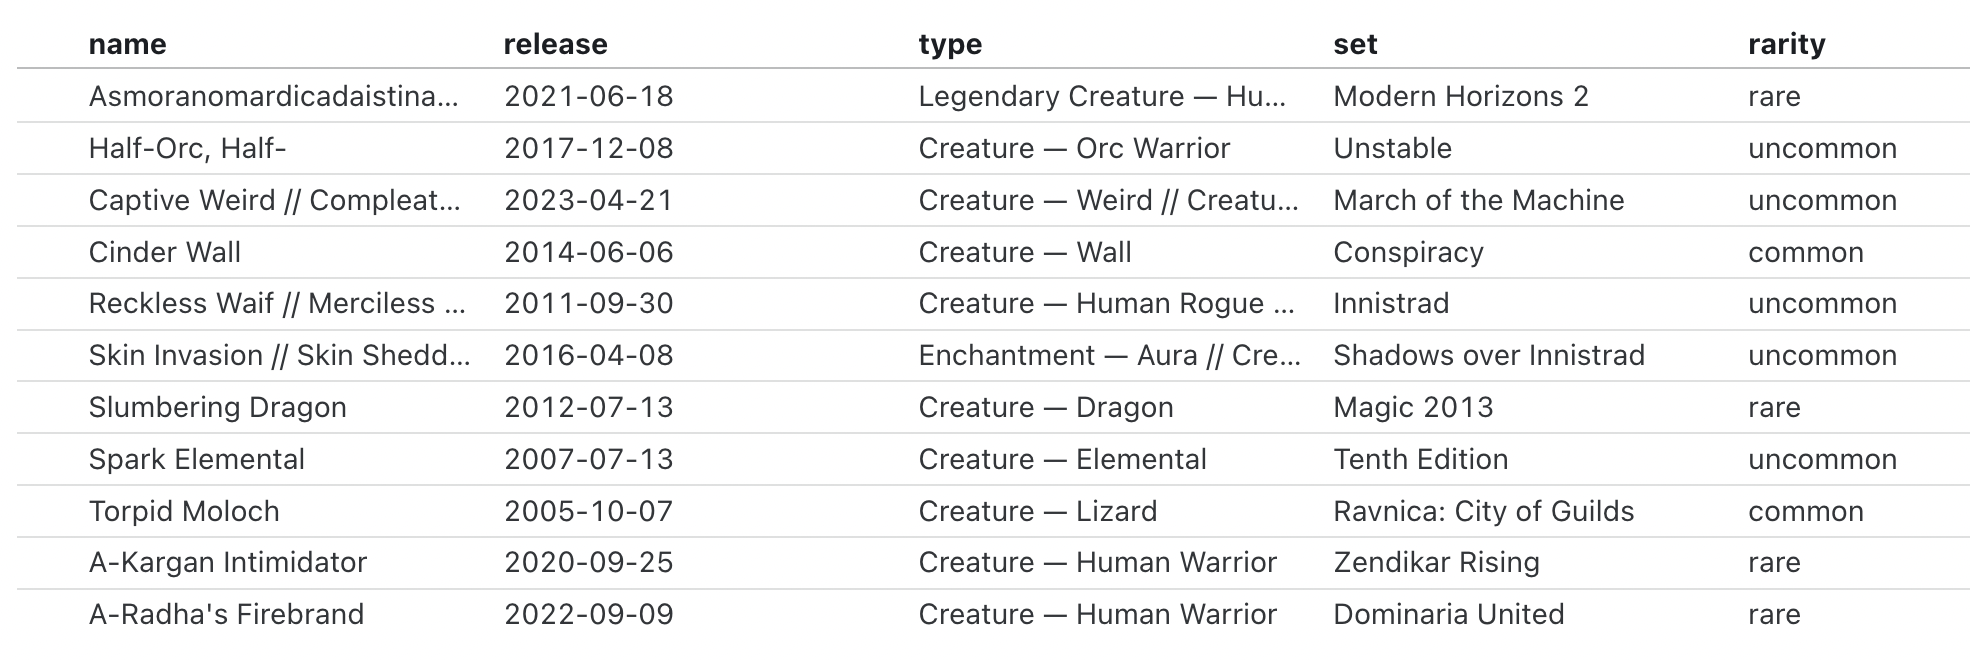 Screenshot of a nicely formatted, scrollable table with data for different Magic: the Gathering cards in each row.